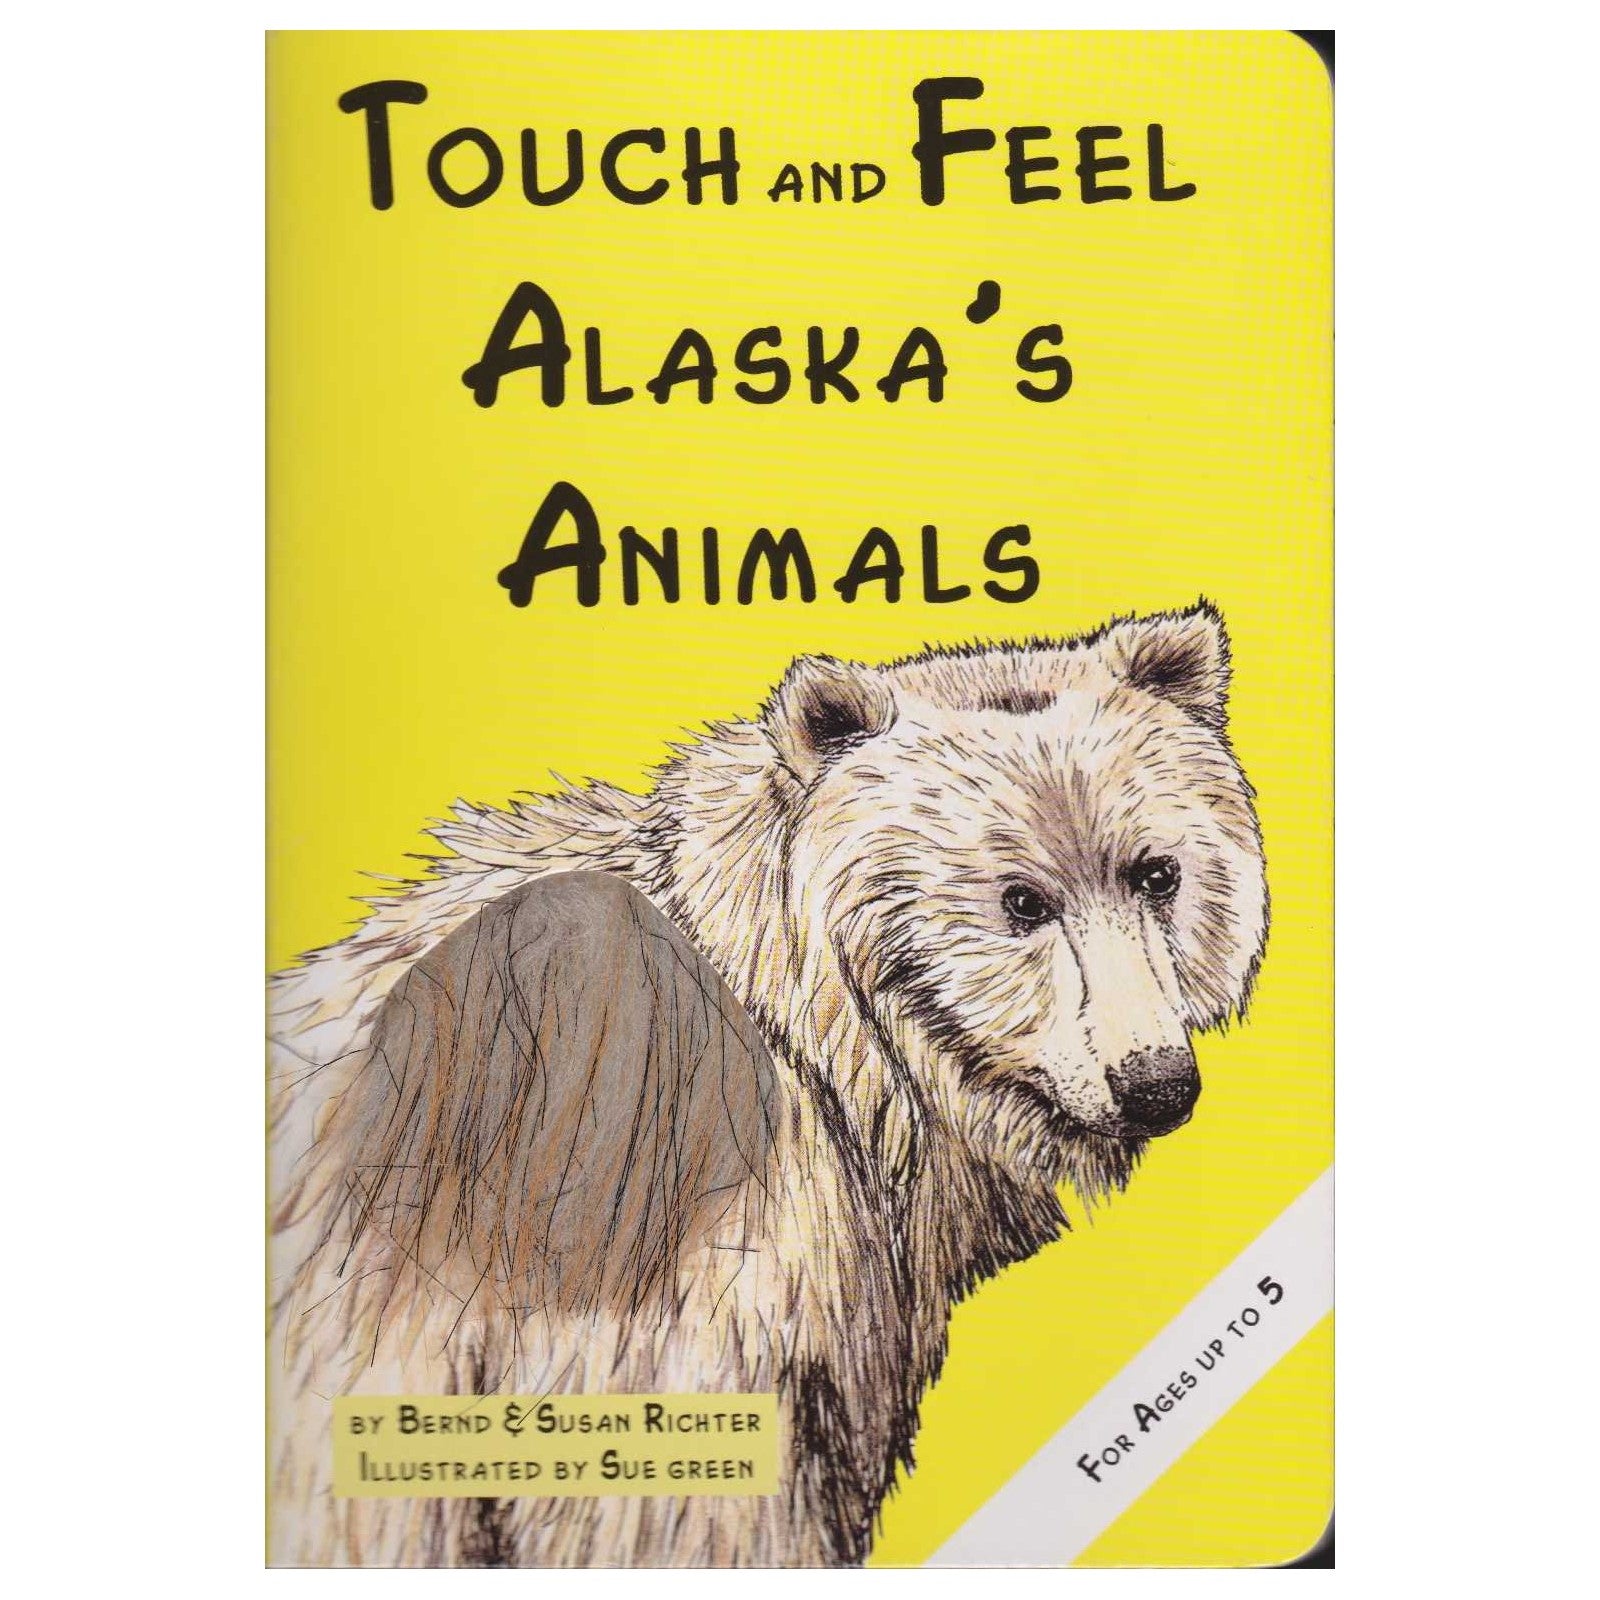 Touch and Feel Alaska's Animals